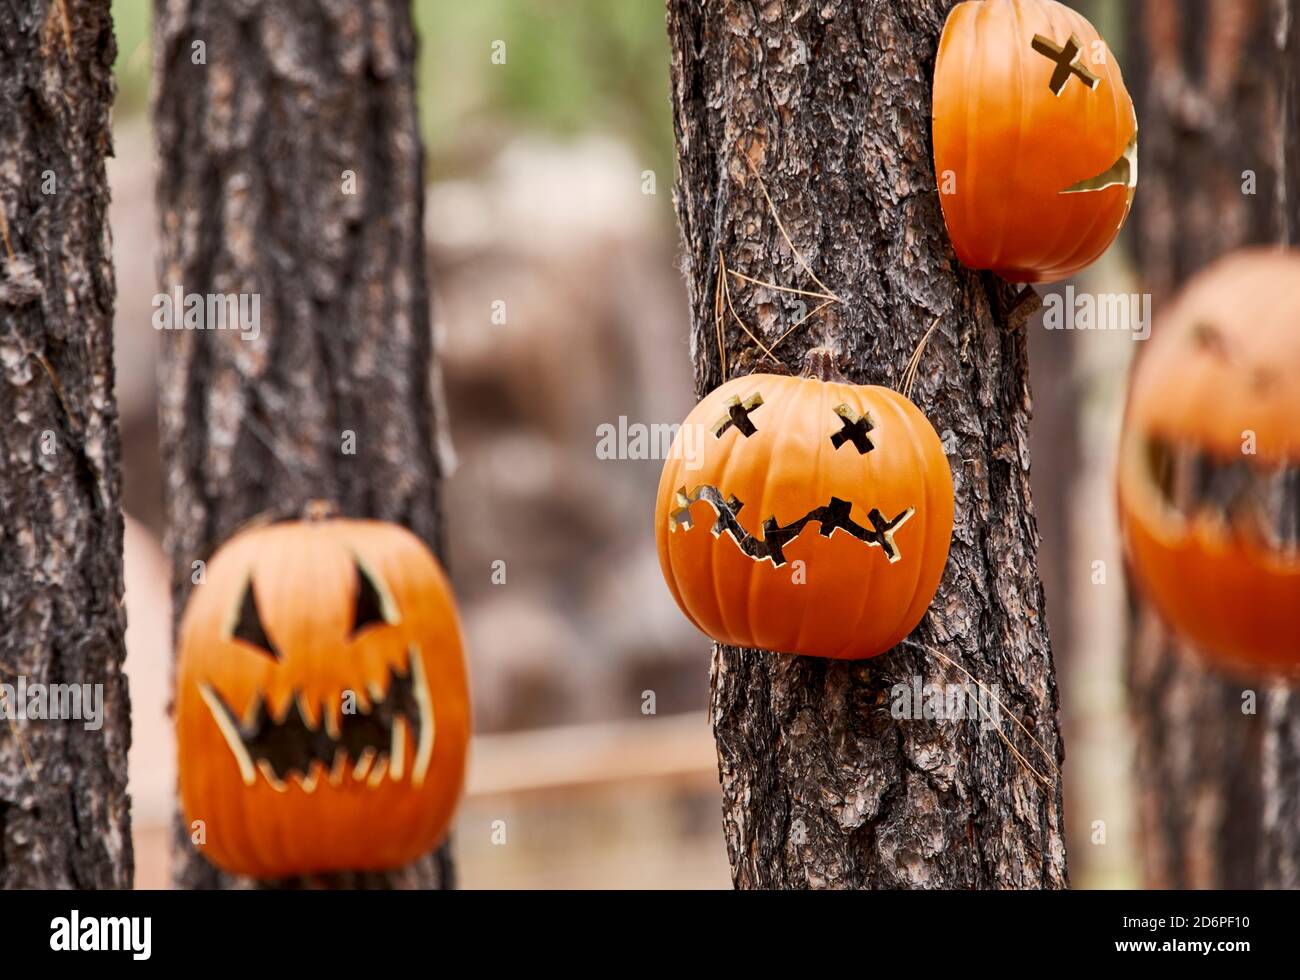 Carved Pumpkin faces on pine trees in a forest with shallow depth of field Stock Photo